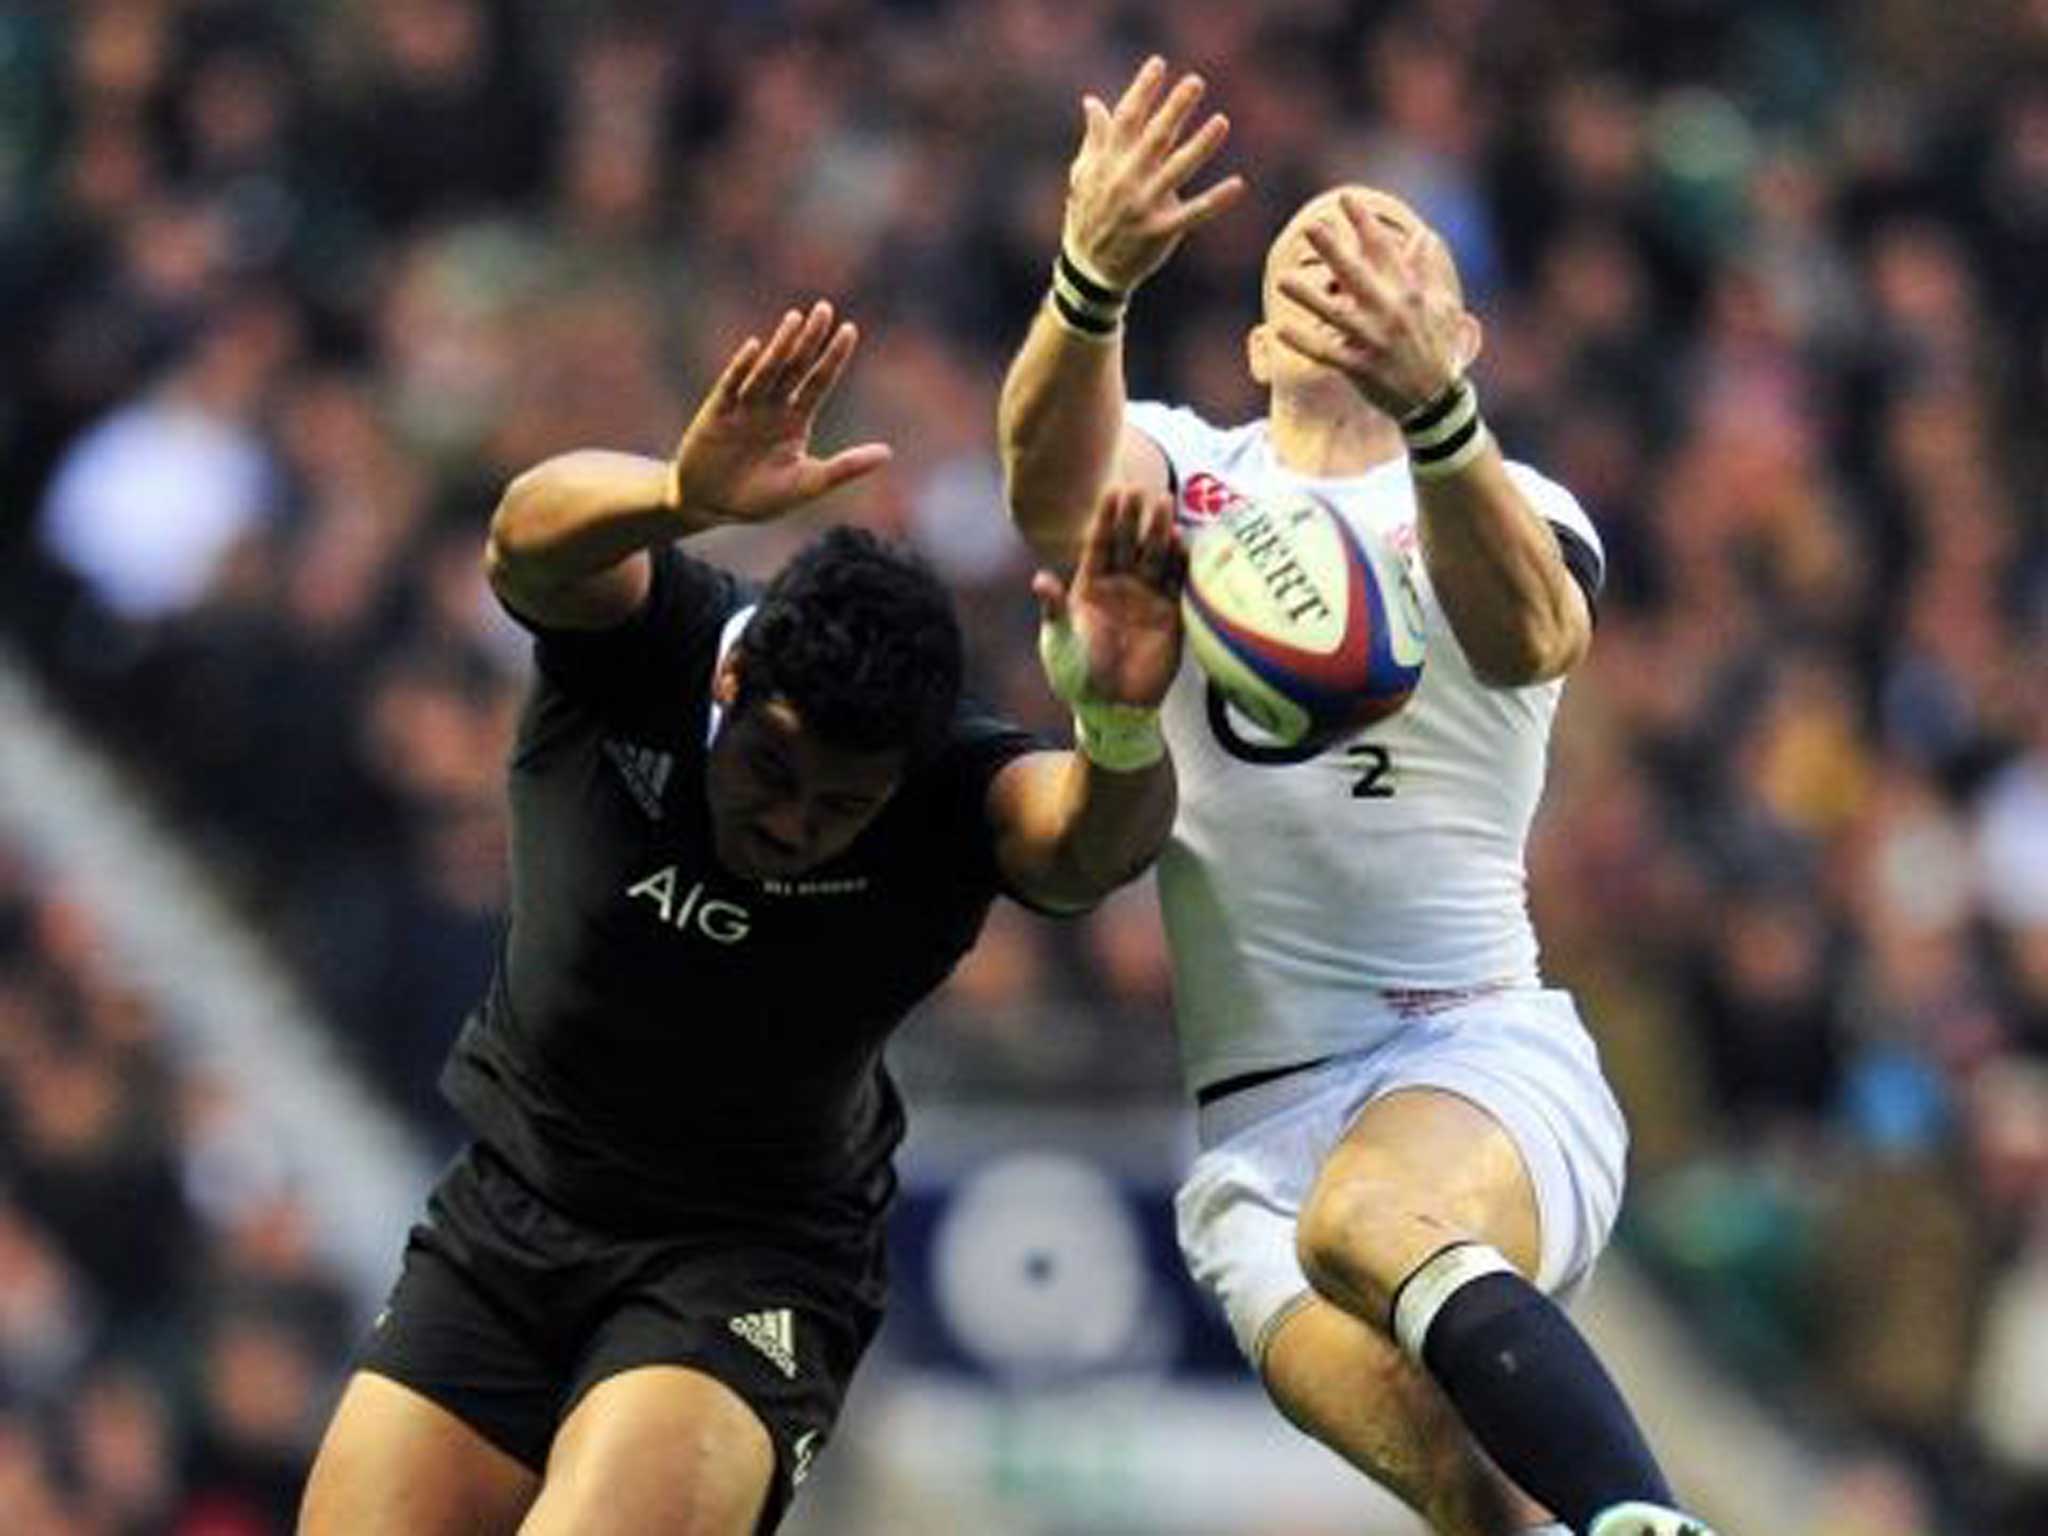 Air force: England’s Mike Brown put in a performance against New Zealand that showed he is made of the right stuff